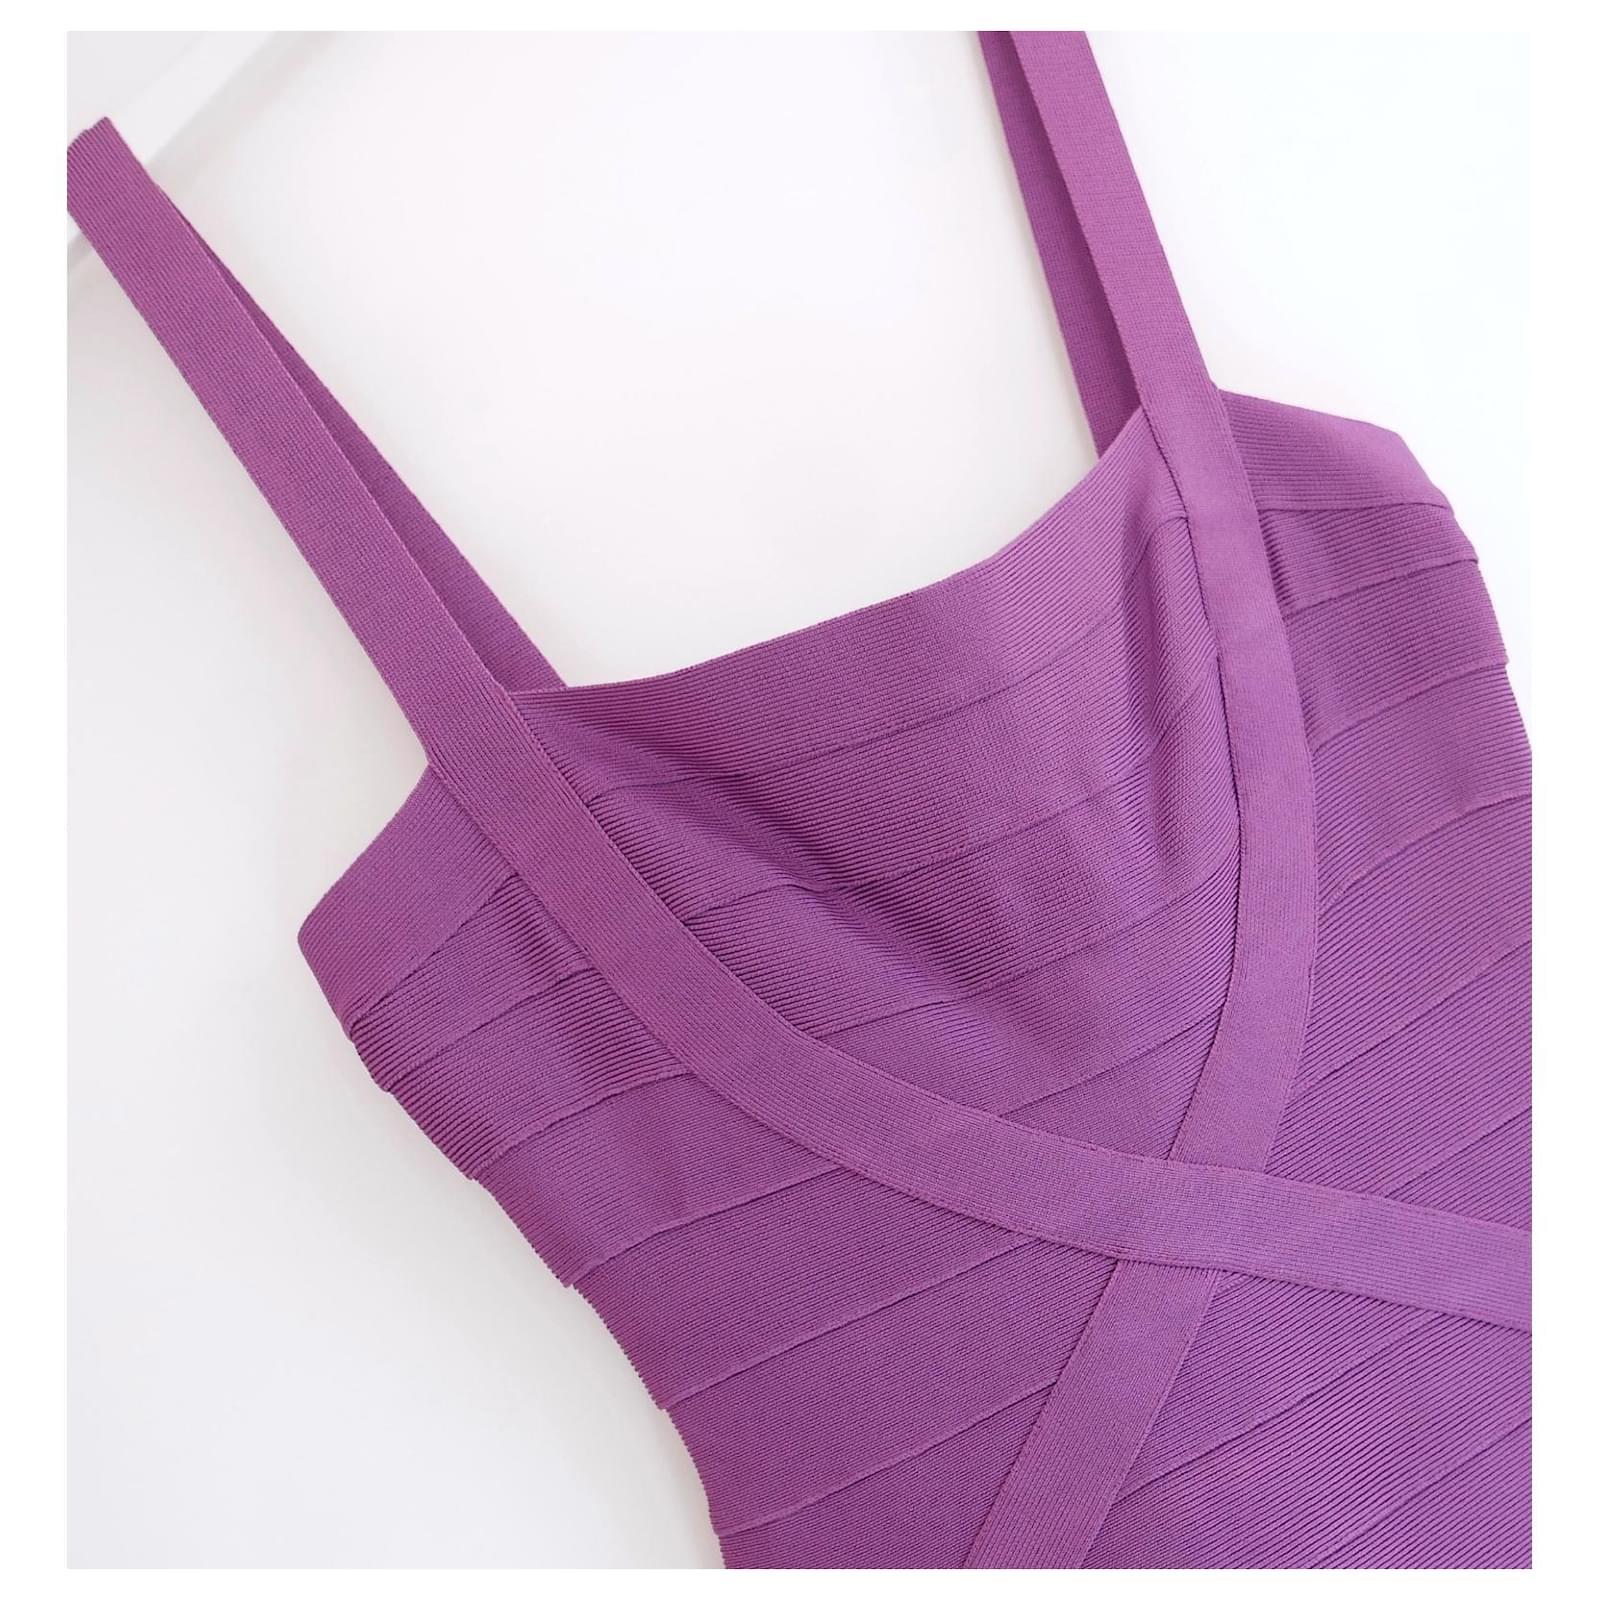 Super flirty Herve Leger Faith dress - bought for £1199 and new with tags. Made from Leger's signature super stretchy, thick 'cinch you in' rayon mix in a gorgeous shade of violet purple. It has super flattering fit and flare bandage construction